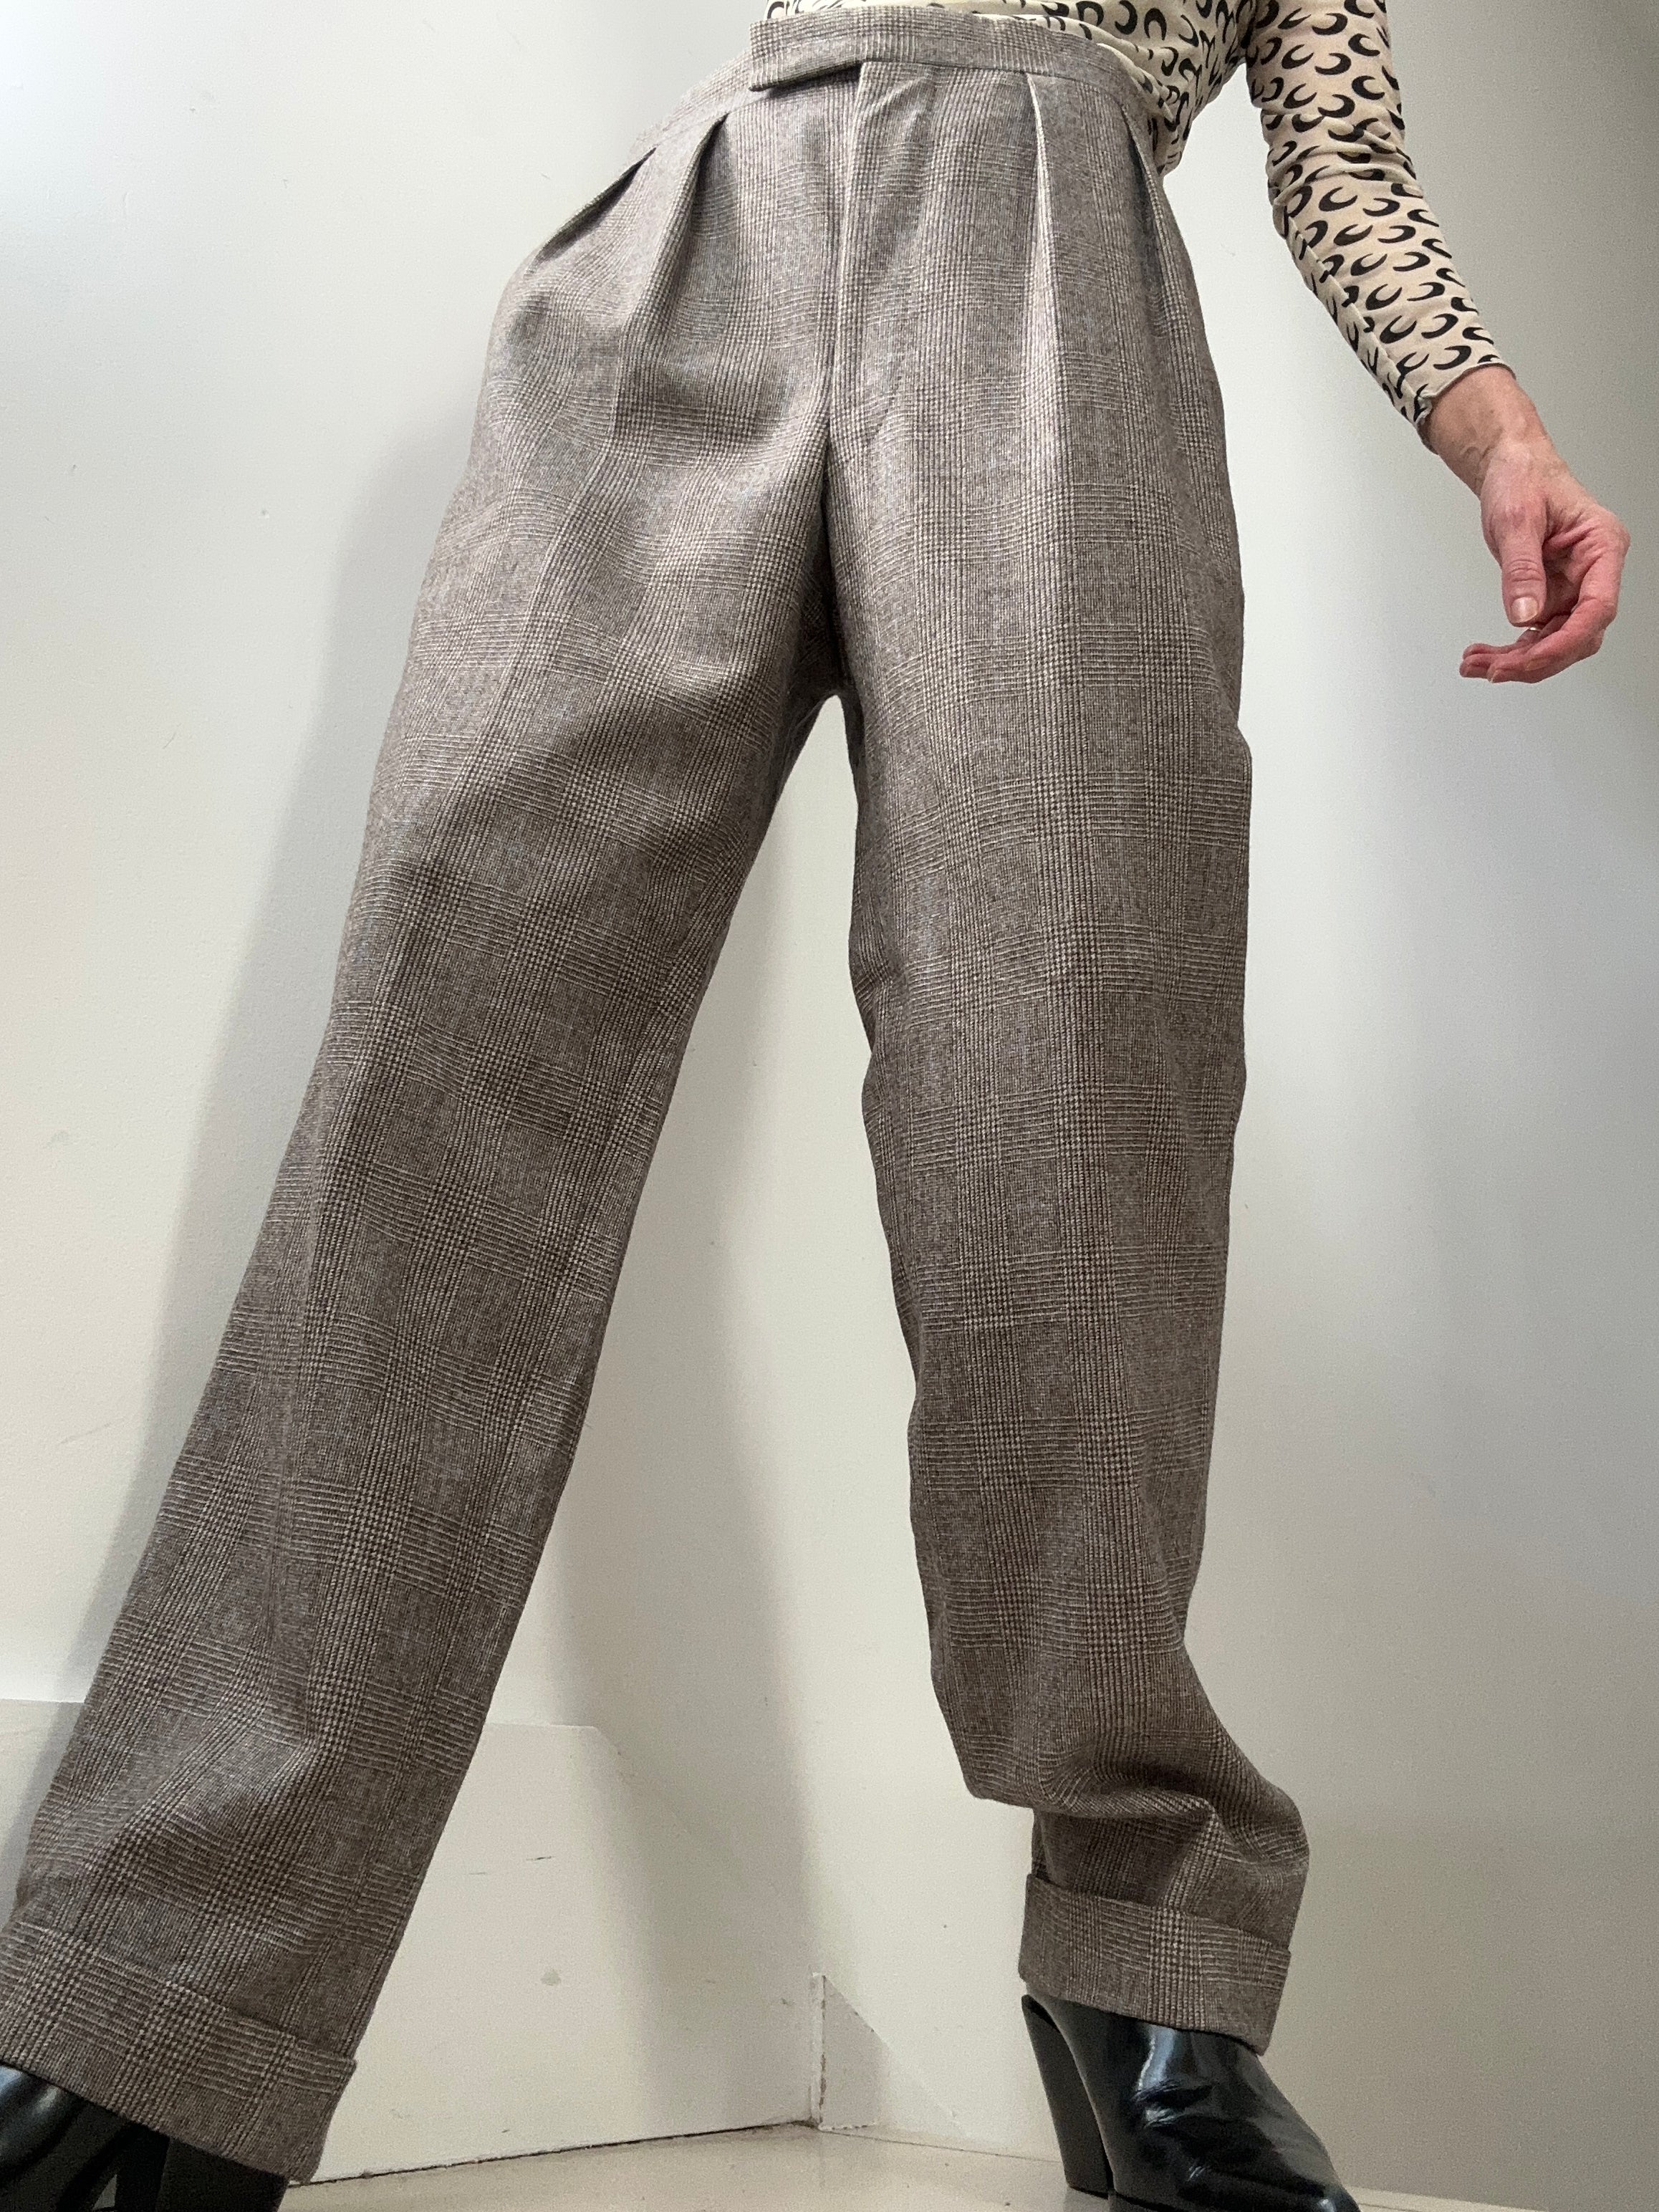 Future Nomads Pants Medium-Large Brown And Blue Checked Pants